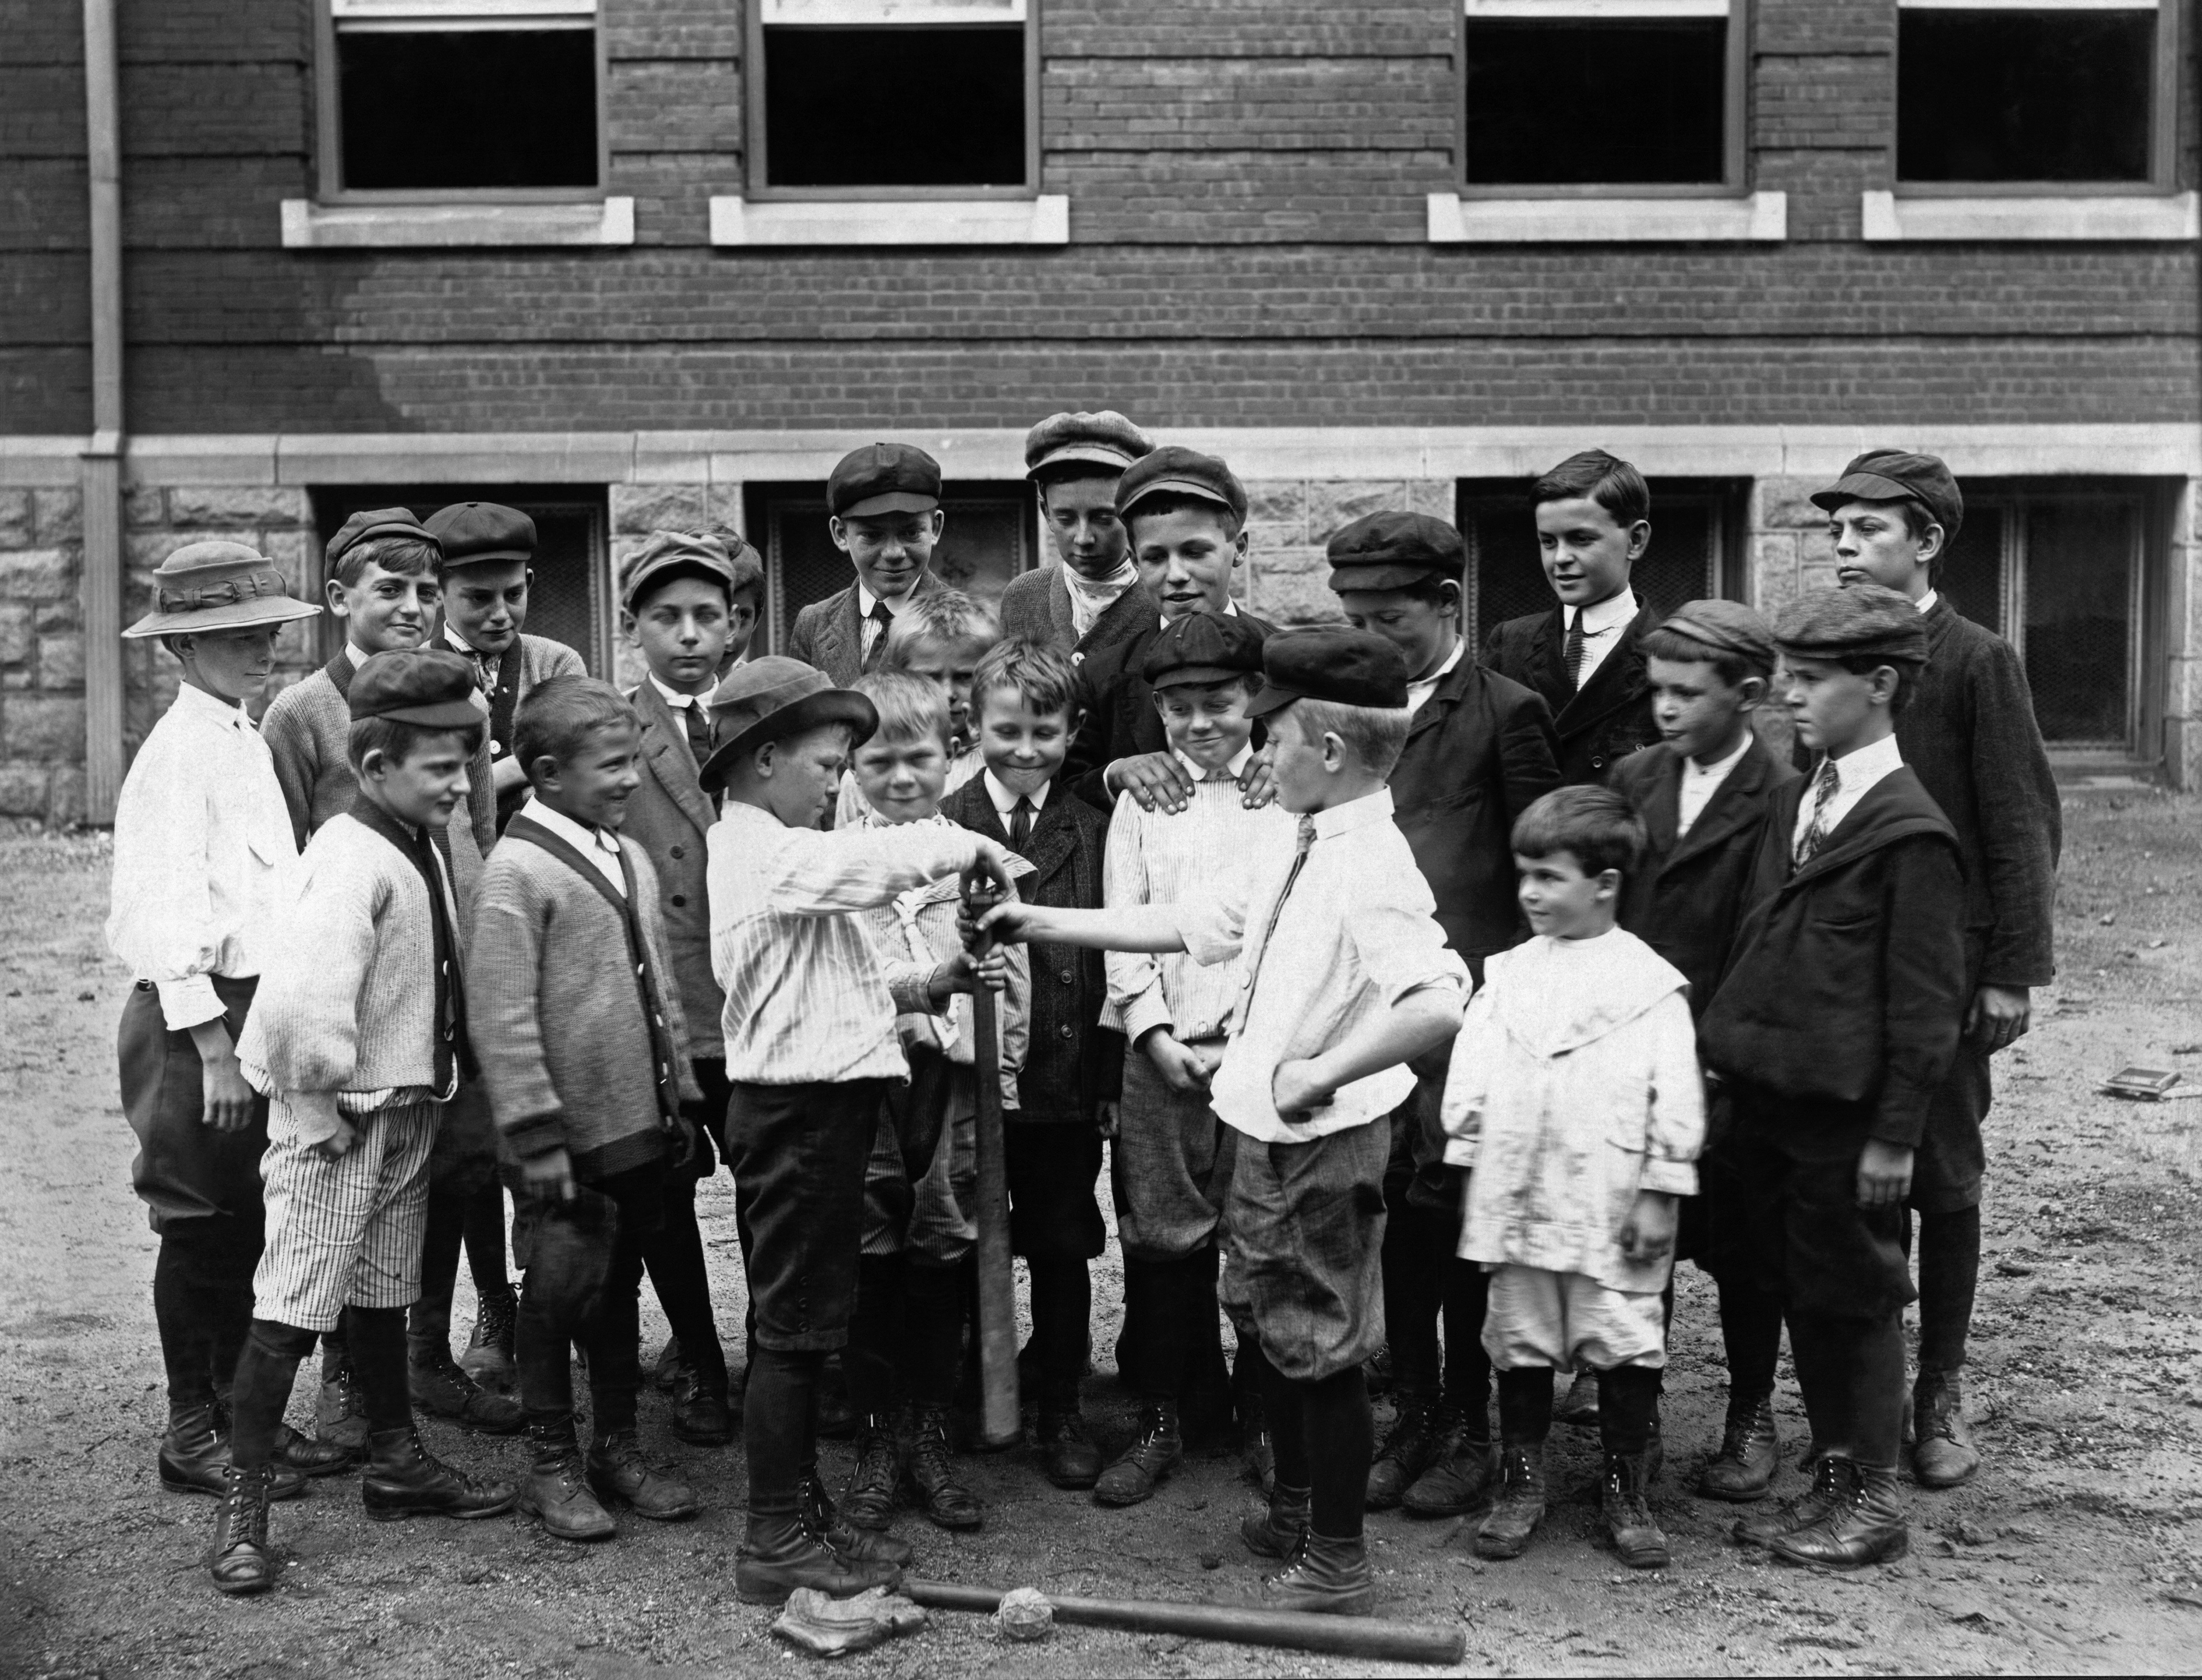 Group of school children with hands on a bat preparing for baseball game.